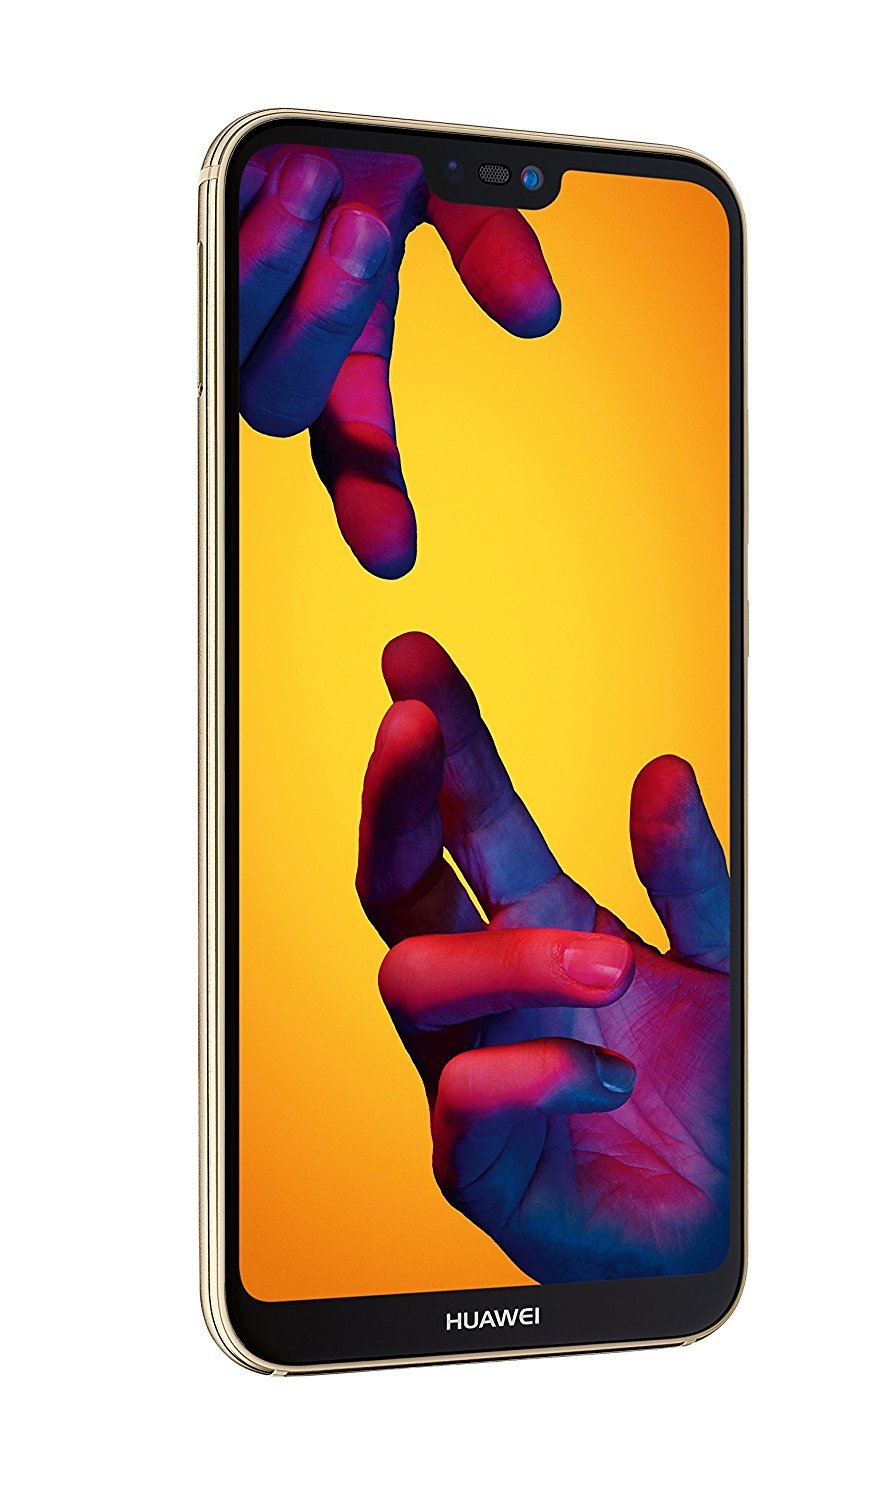 Deserve itself Misery Huawei P20 Lite specs, review, release date - PhonesData